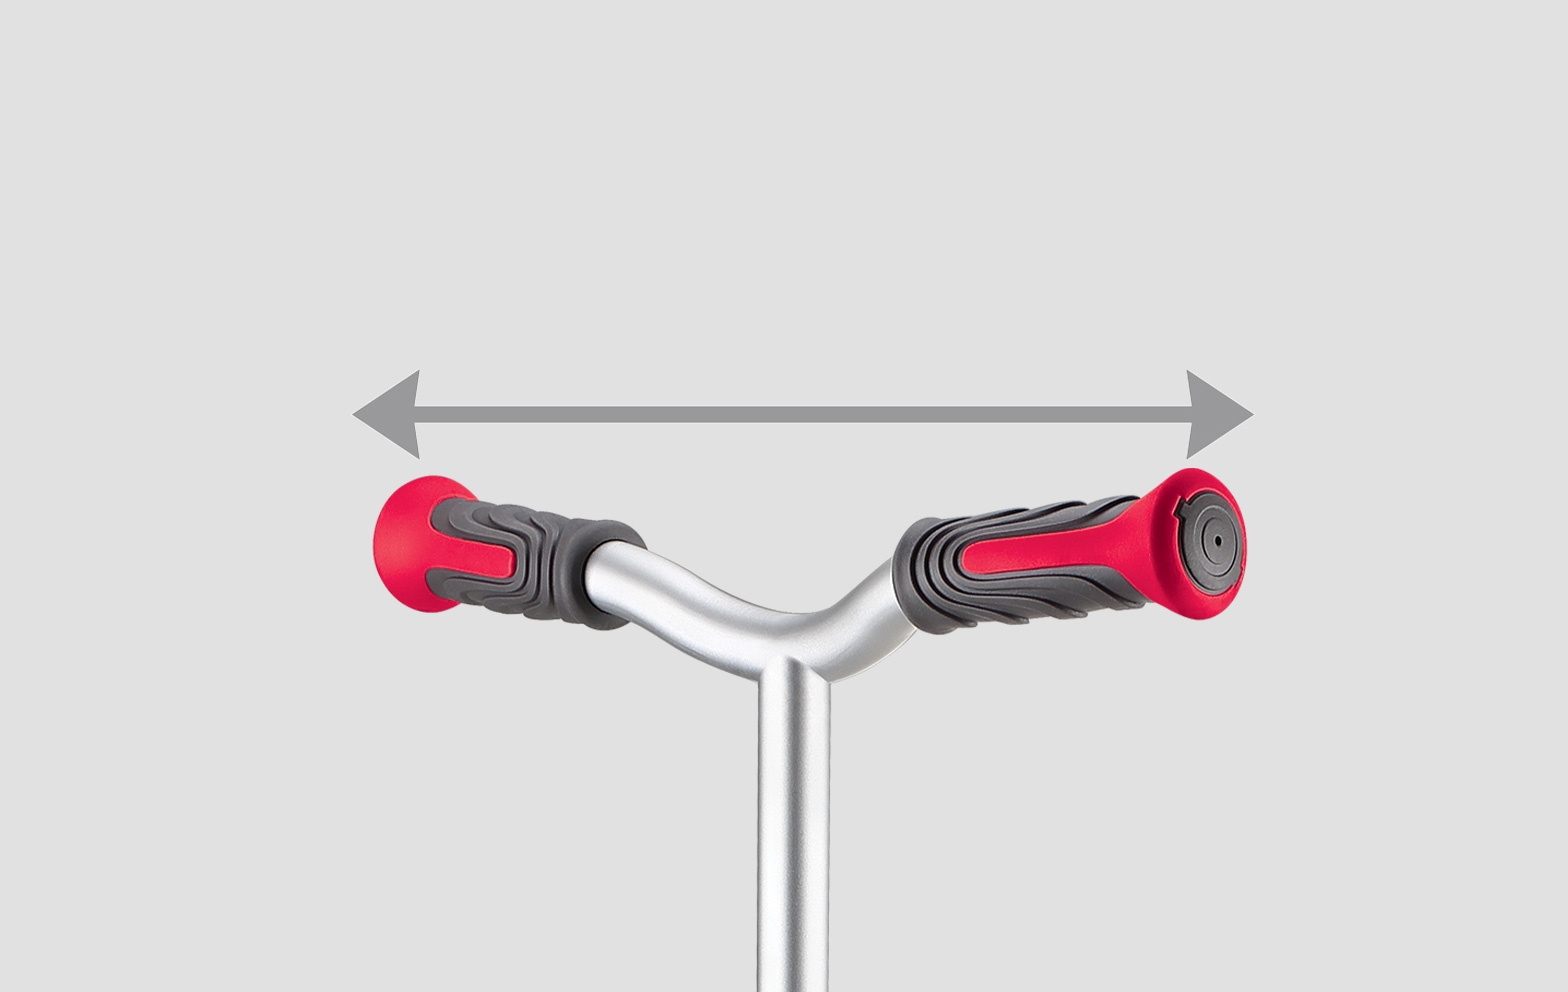 Extra-wide scooter handlebars with TPR ergonomic grips